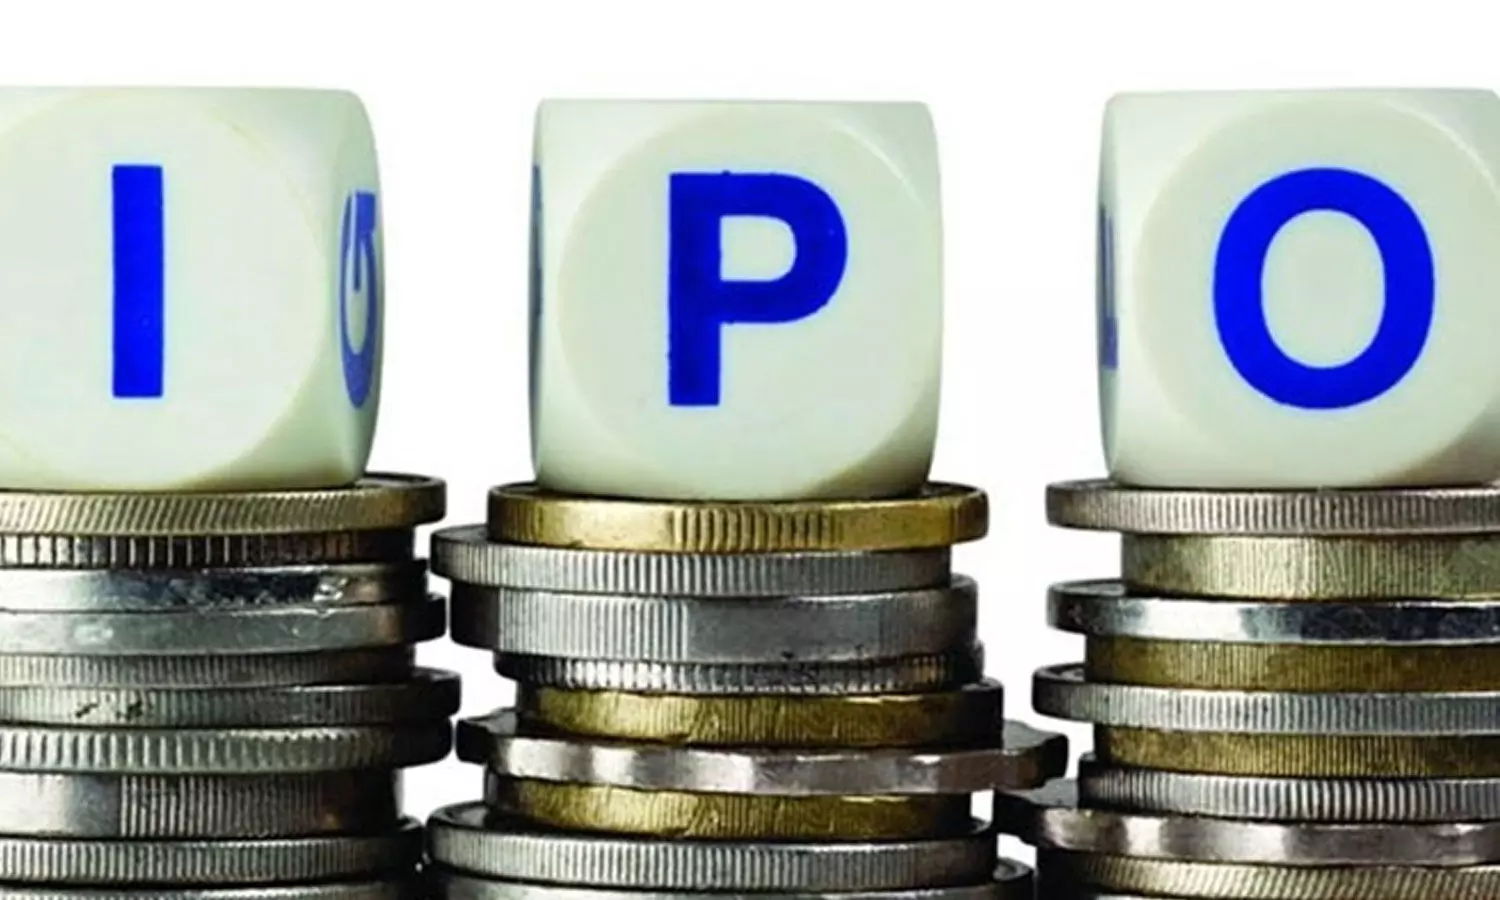 Emcure, Glenmark arm, 3 others line up Rs 7000 crore IPOs